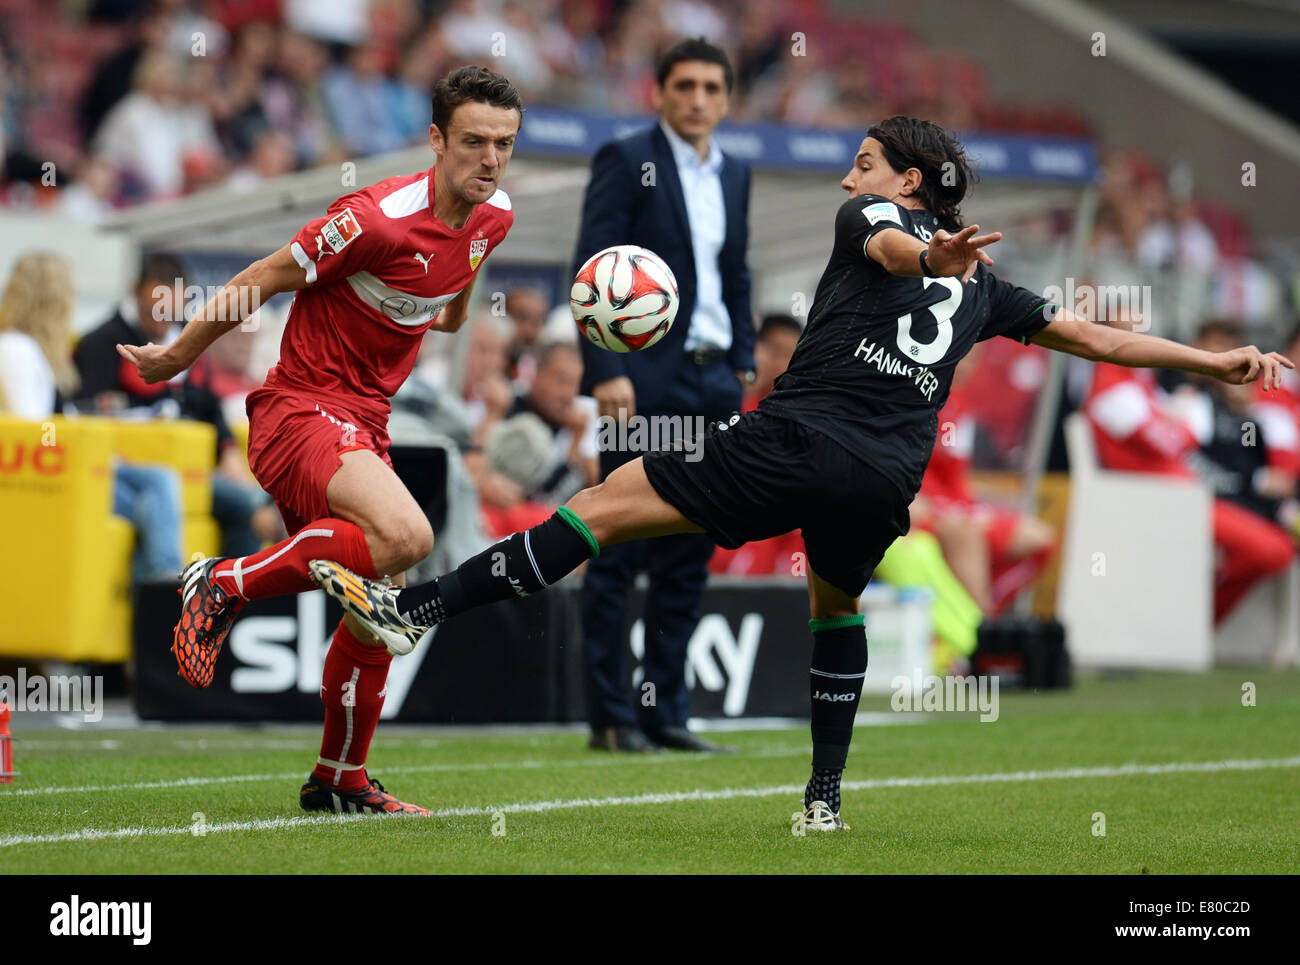 Stuttgart, Germany. 27th Sep, 2014. Stuttgart's Christian Gentner (L) vies for the ball with Hanover's Miiko Albornoz (R) during the German Bundesliga soccer match between VfB Stuttgart and Hannover 96 at Mercedes-Benz Arena in Stuttgart, Germany, 27 September 2014. Photo: Bernd Weissbrod/dpa (ATTENTION: The DFL limits the utilisation and publication of sequential pictures on the internet and other online media during the match (including half-time) on 15 pictures per game.)/dpa/Alamy Live News Stock Photo